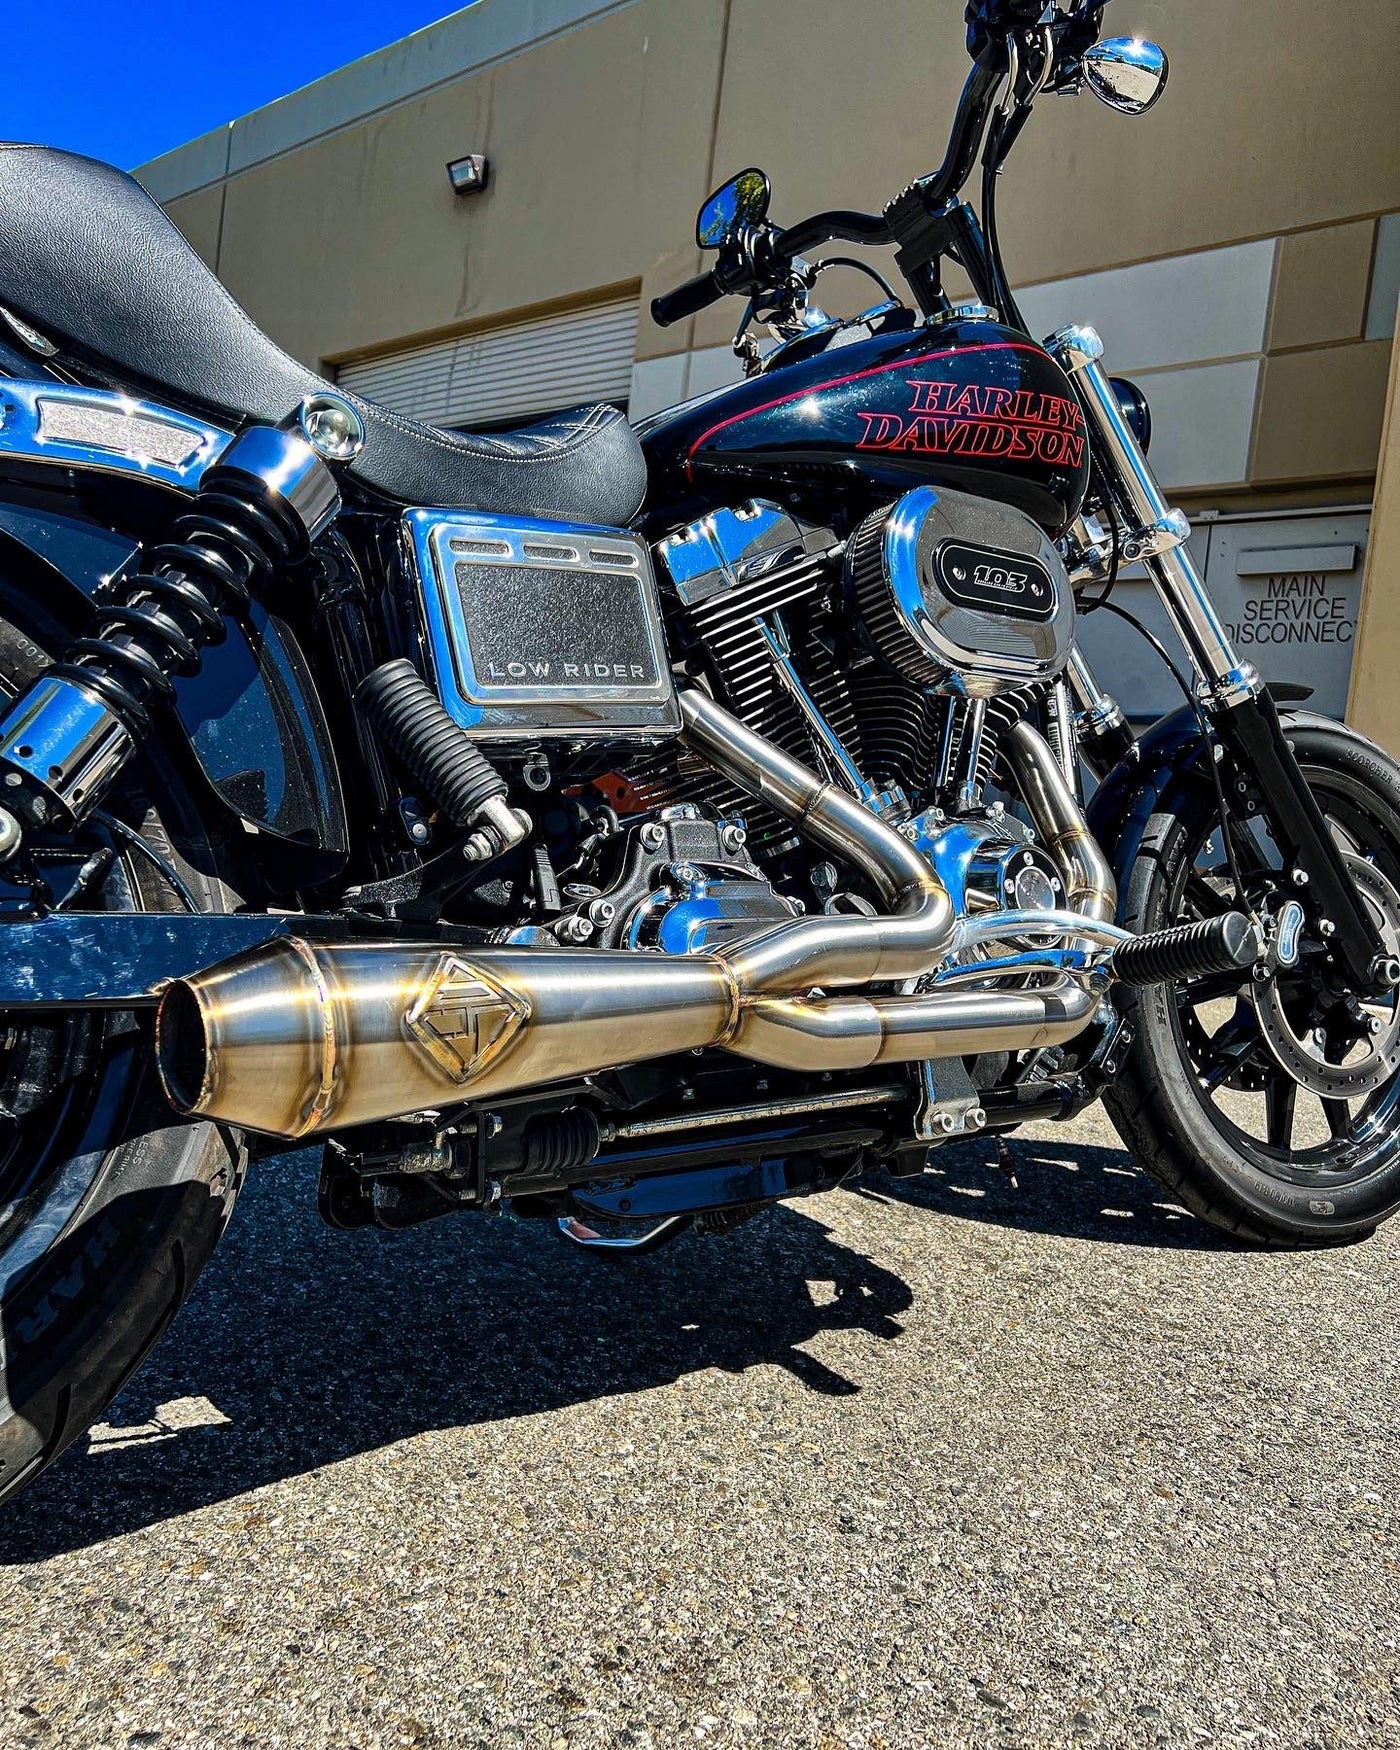 A SP Concepts Lane Splitter Exhaust 06-17 Dyna (stainless) motorcycle is parked in front of a building.